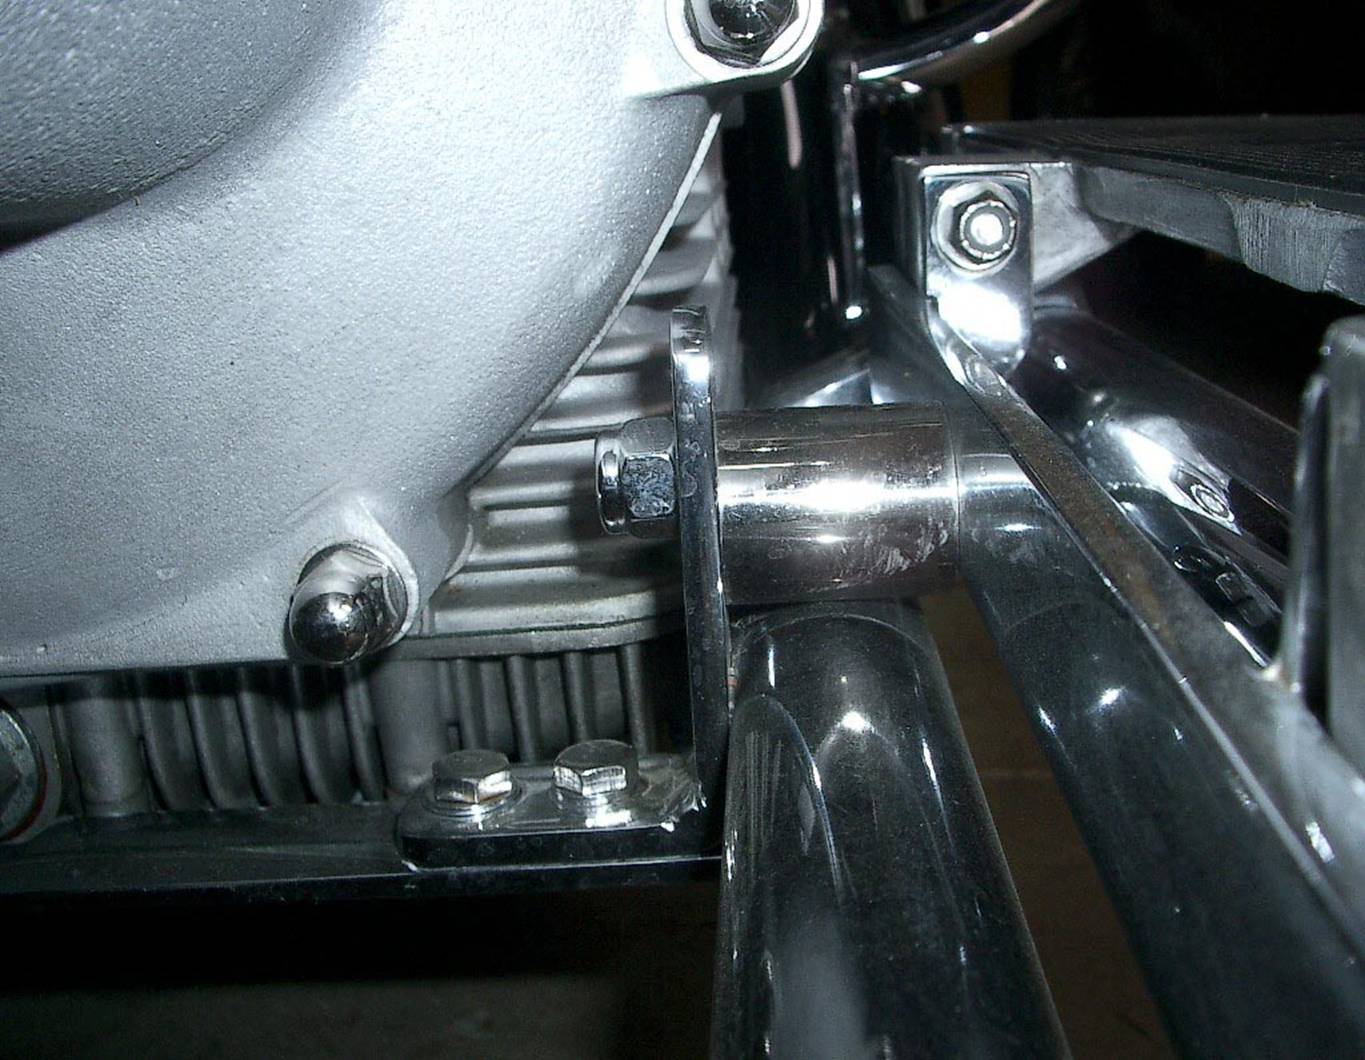 You can see on mine the cam type of mounting where I can turn the round offset hole cam to lift or lower the boards.